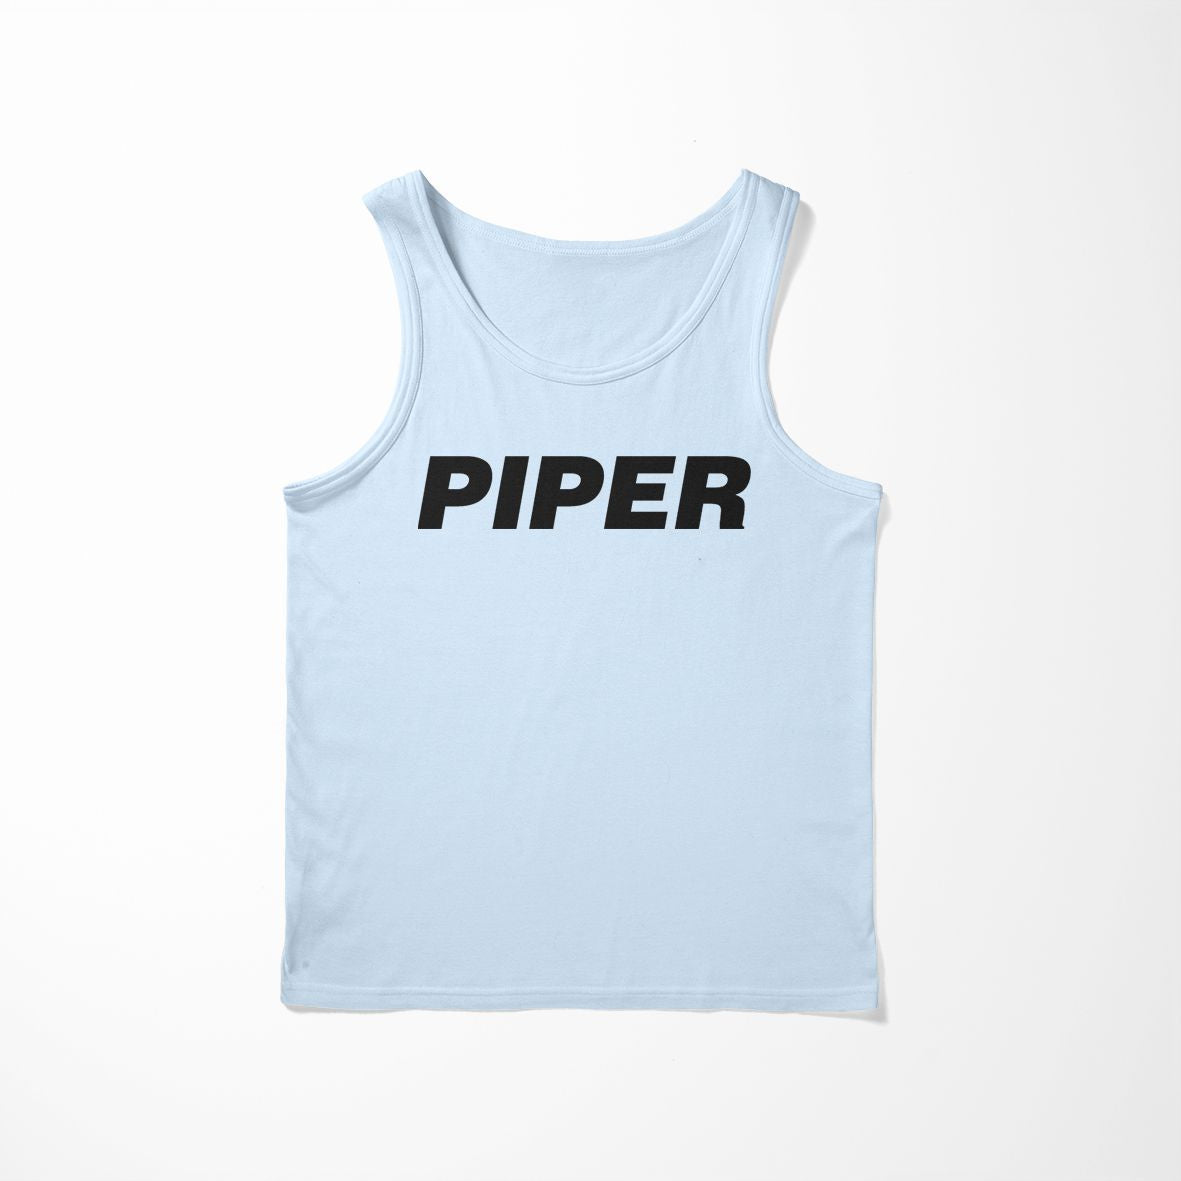 Piper & Text Designed Tank Top